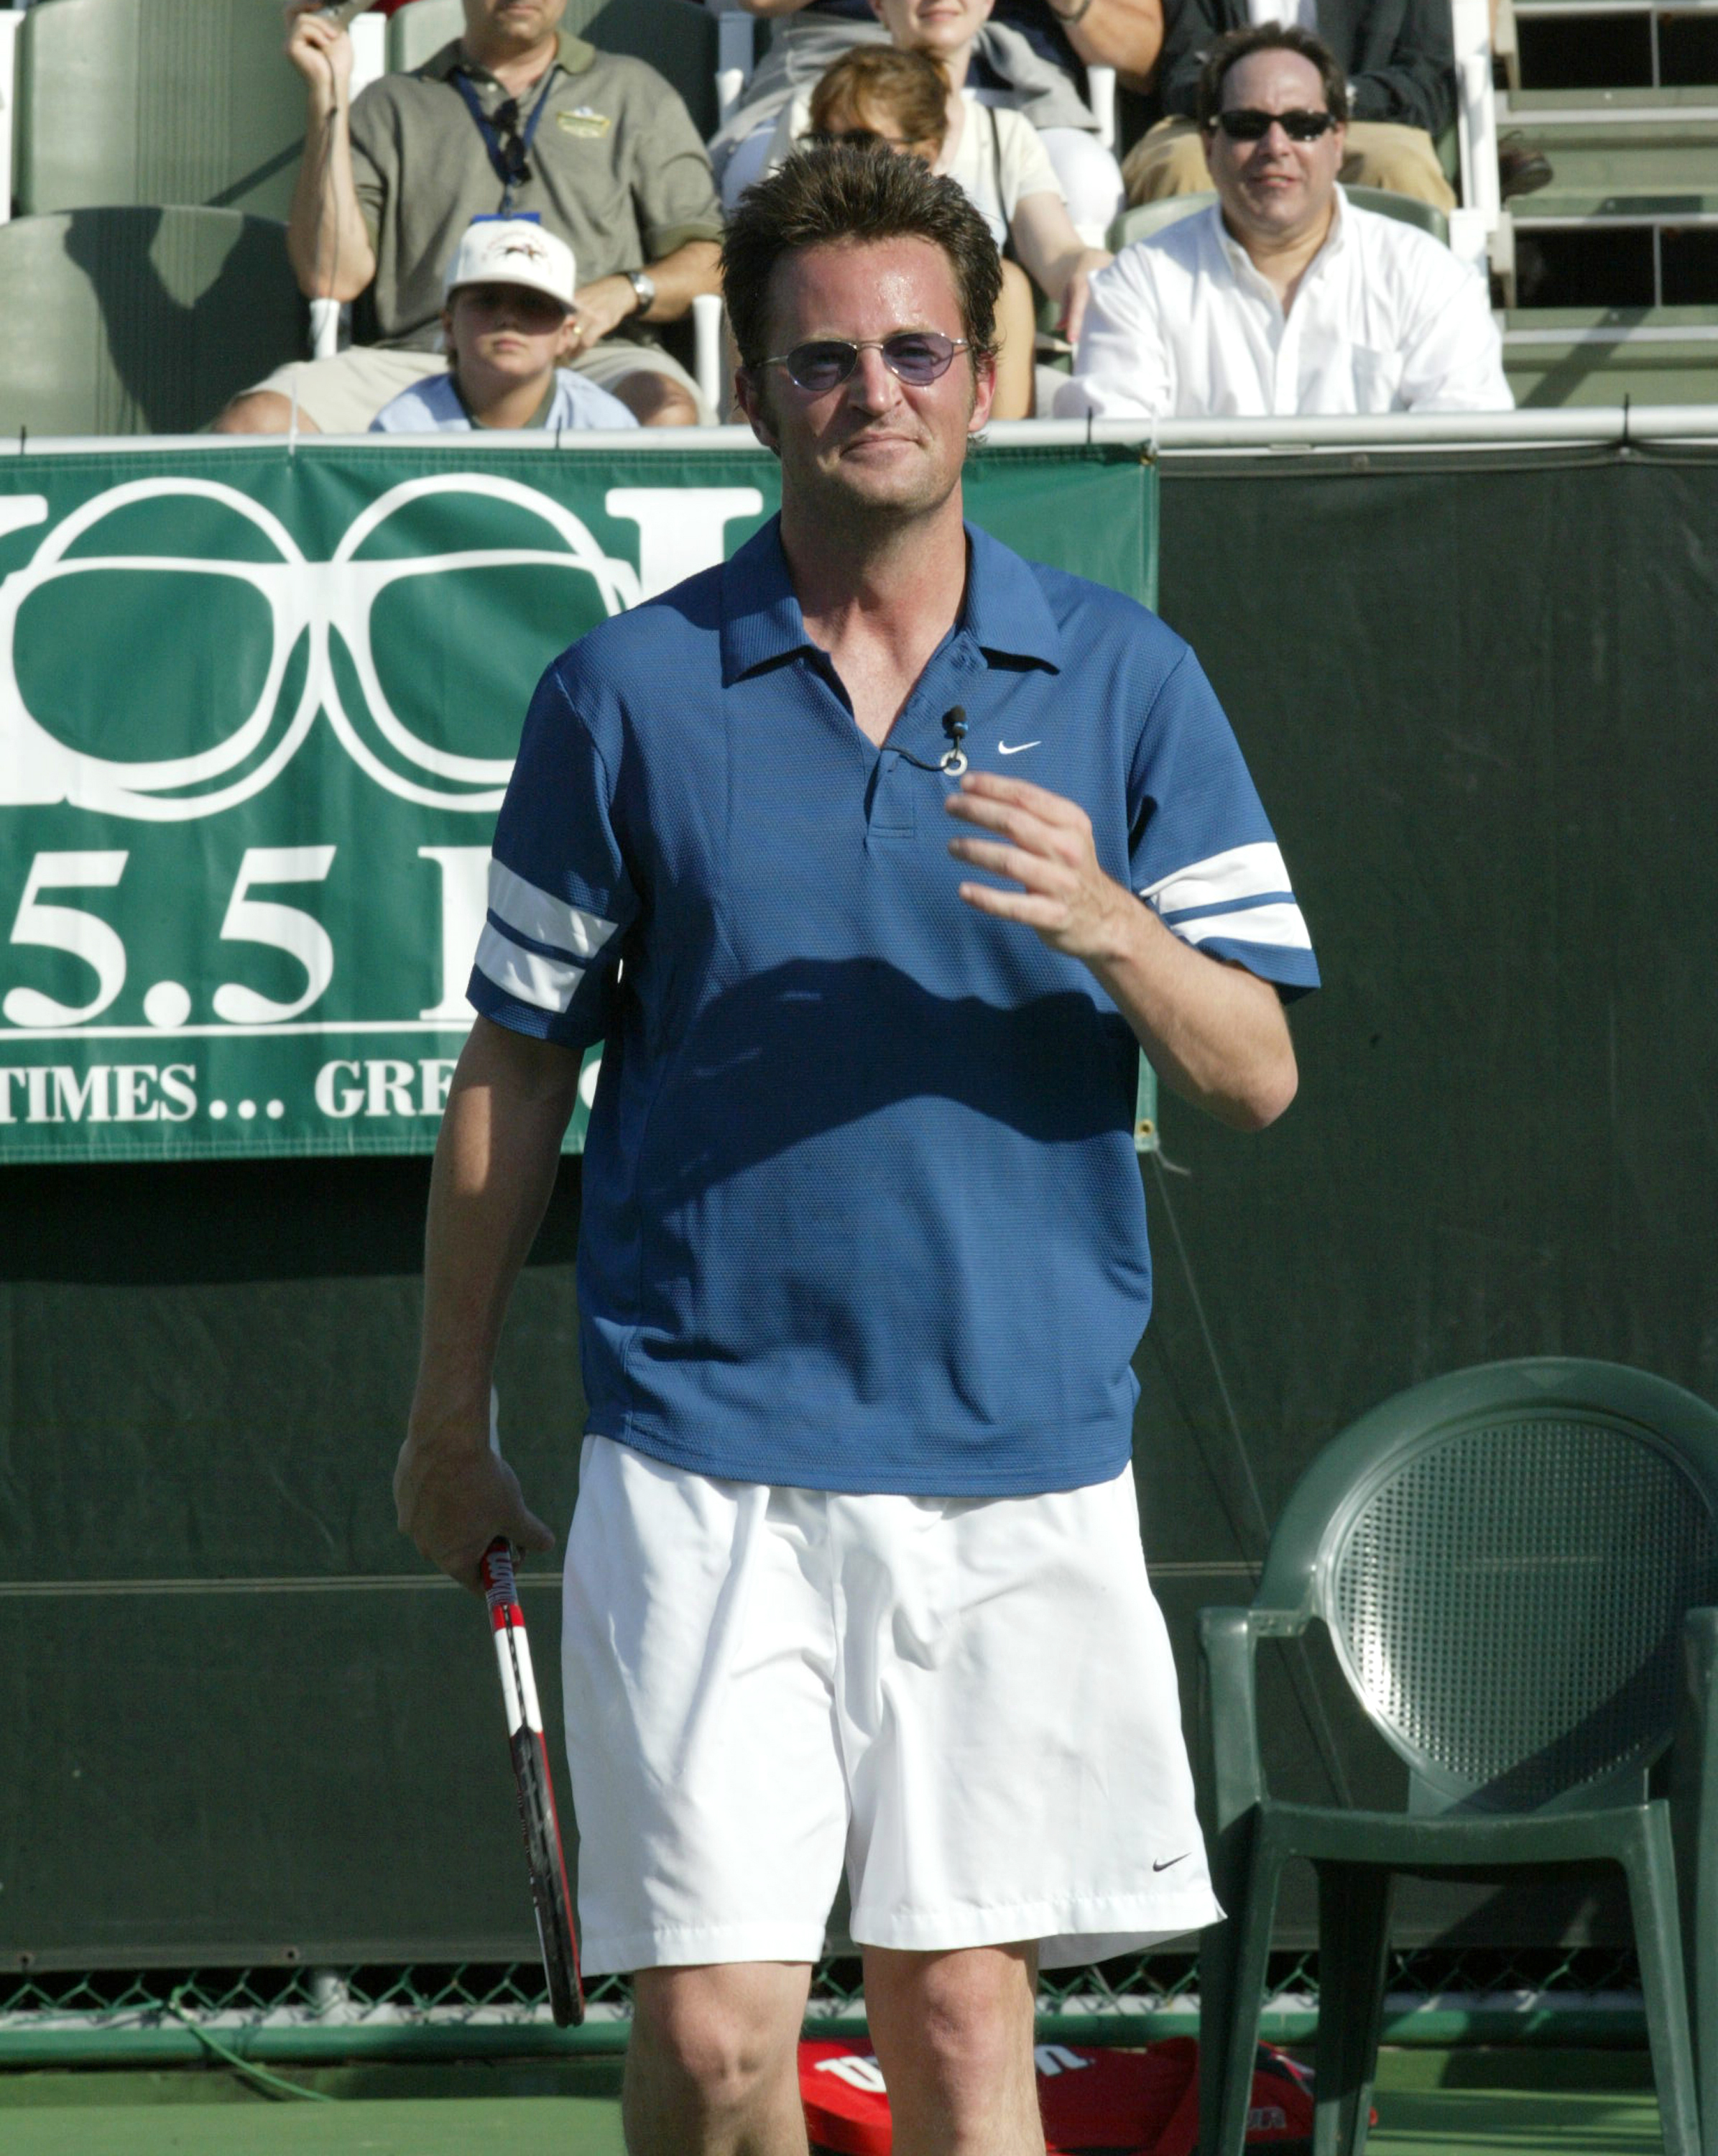 Matthew Perry participates in the Chris Evert/Bank of America Pro-Celebrity Classic in Delray Beach, Florida on December 5, 2004 | Source: Getty Images